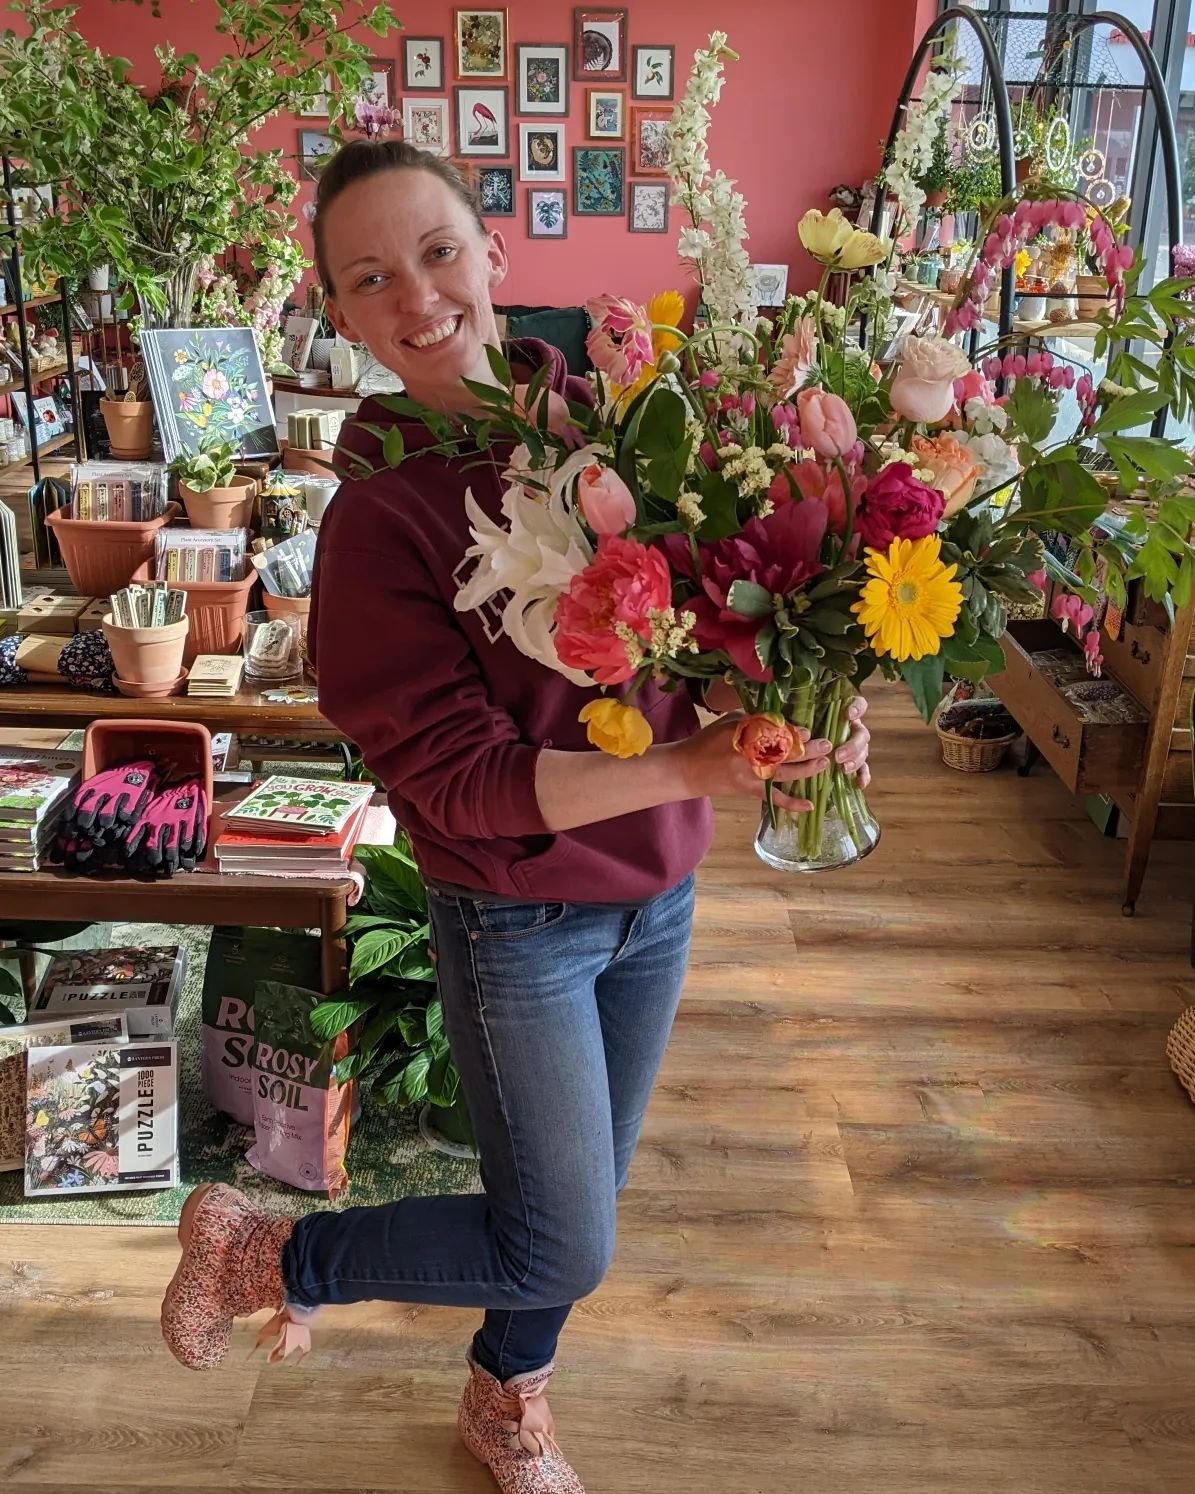 *It's the biggest flower week of the year* Get your flower orders in early for Mother's Day, Prom, Nurses and Teachers and everyone else you want to celebrate this week. The store is fully stocked with beautiful plants and gifts for every occasion. S